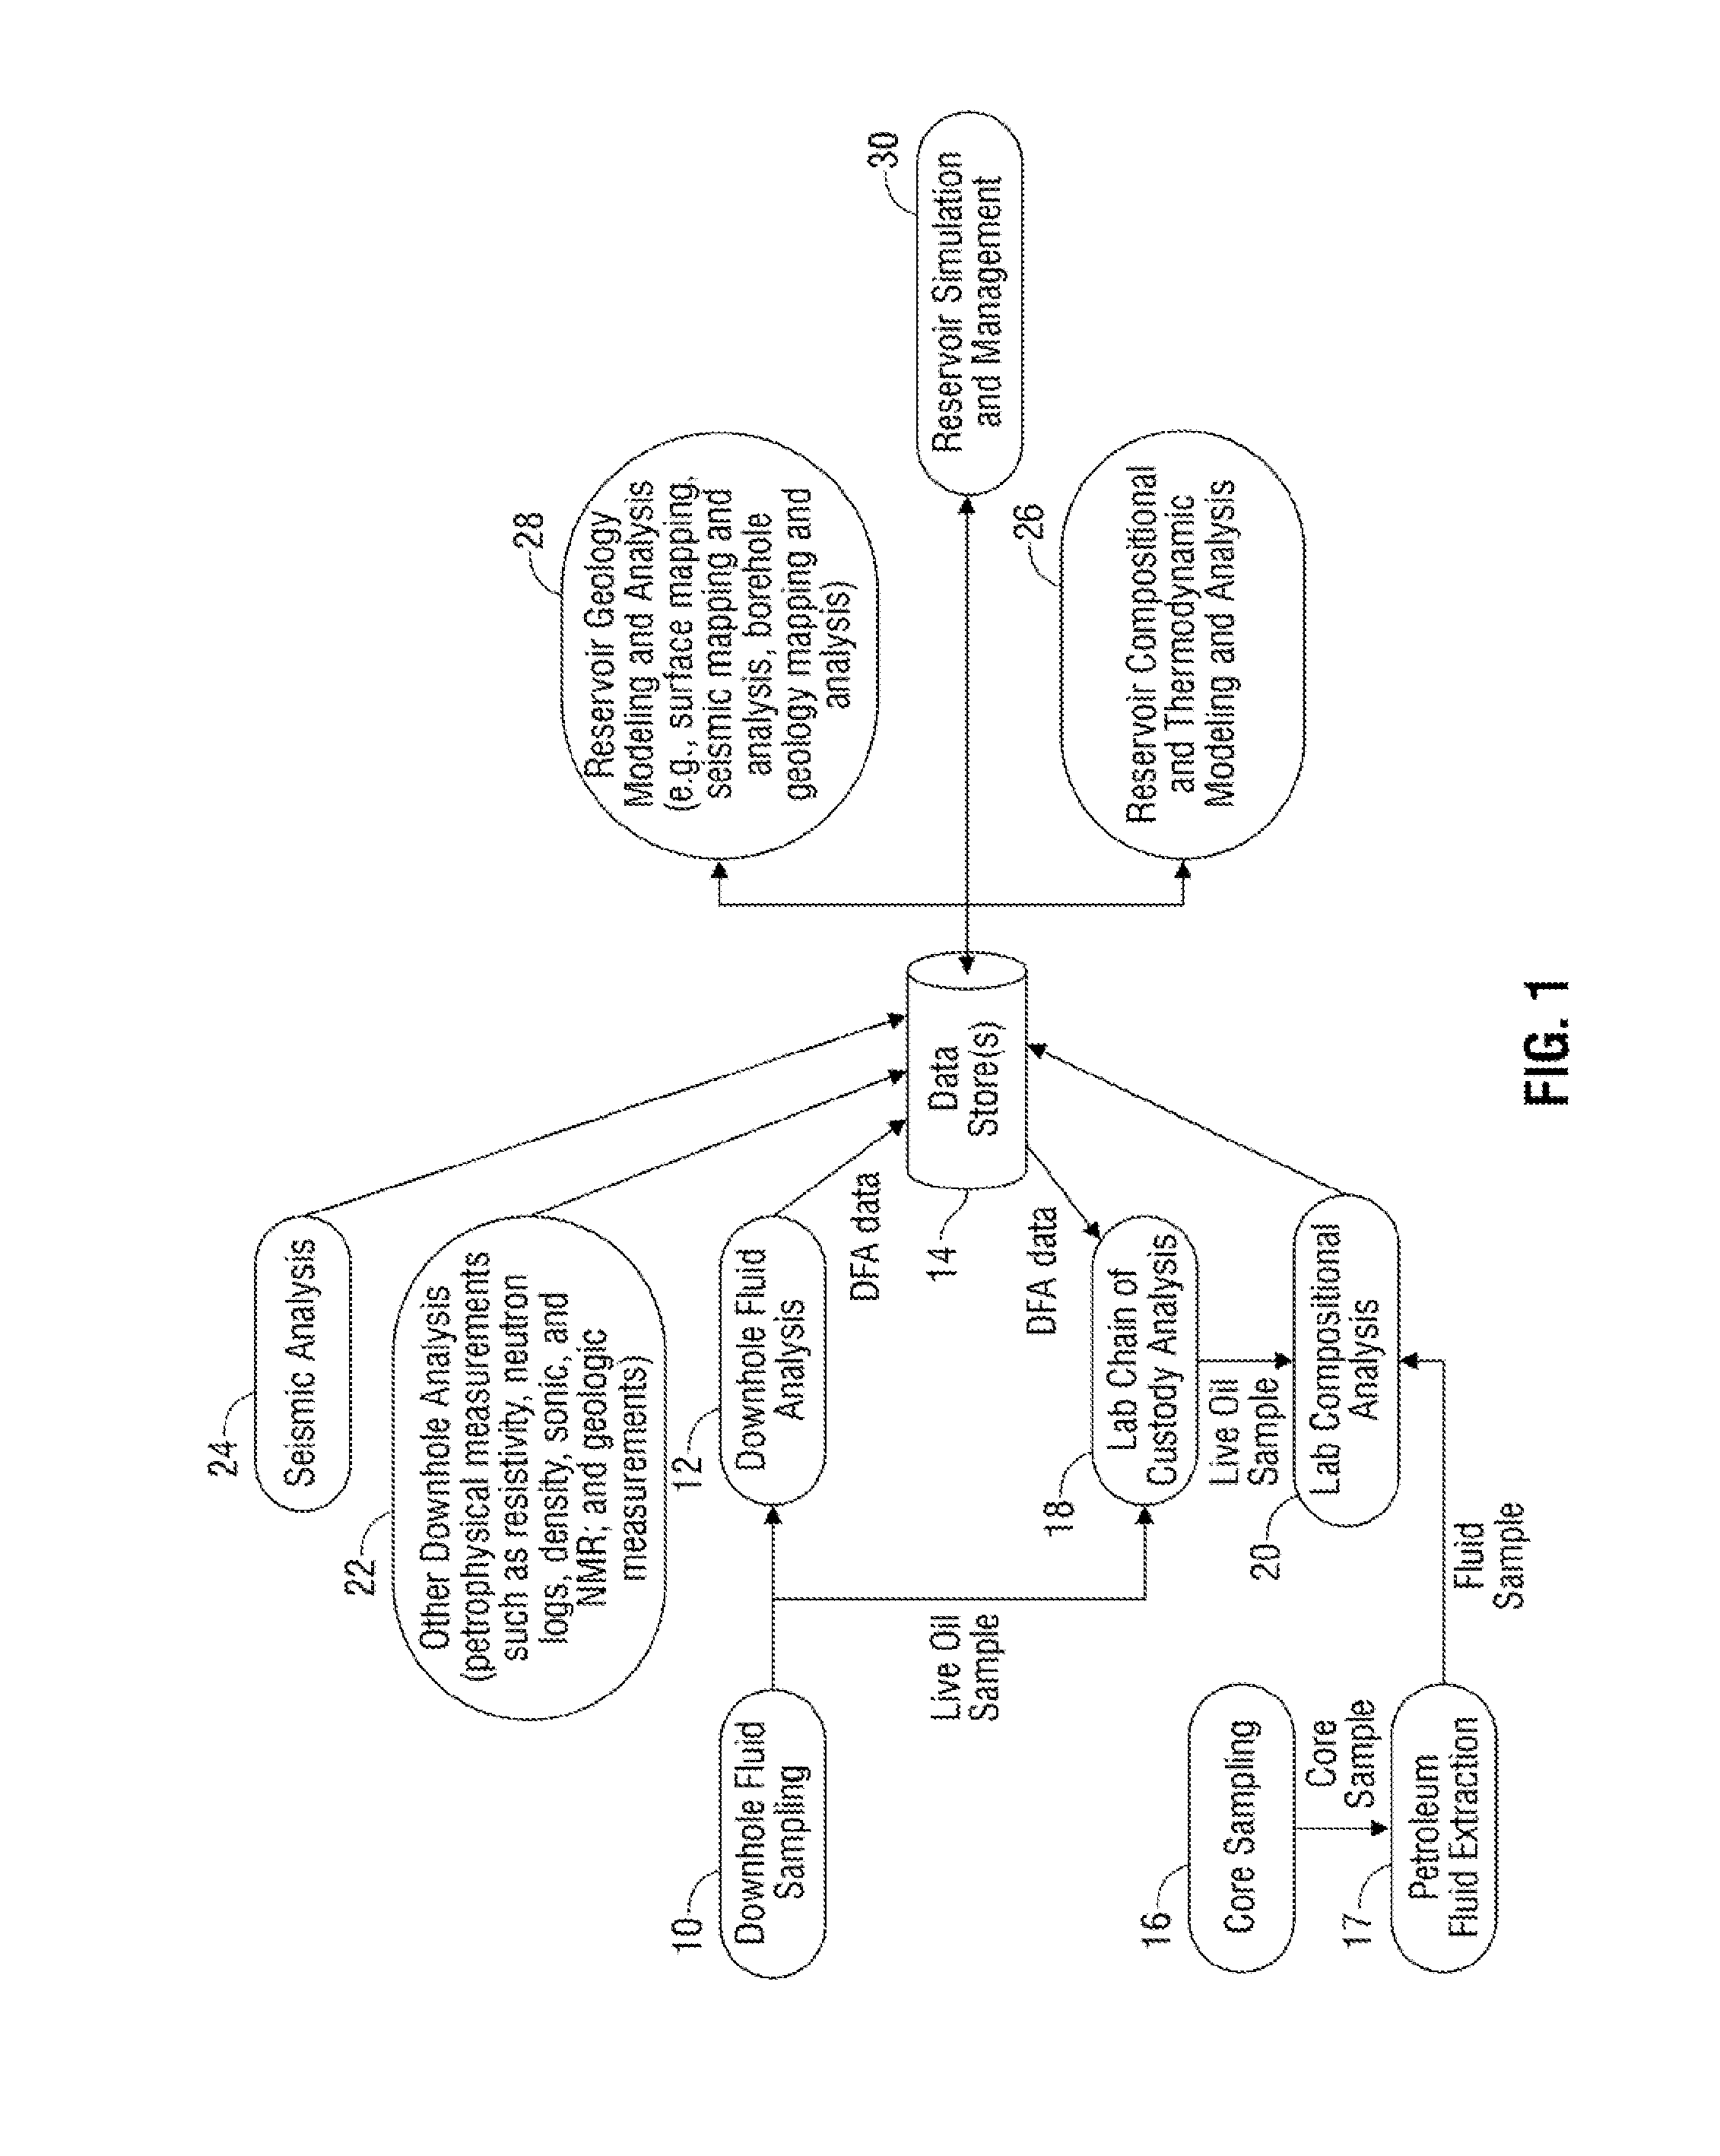 Method for analysis of the chemical composition of the heavy fraction of petroleum